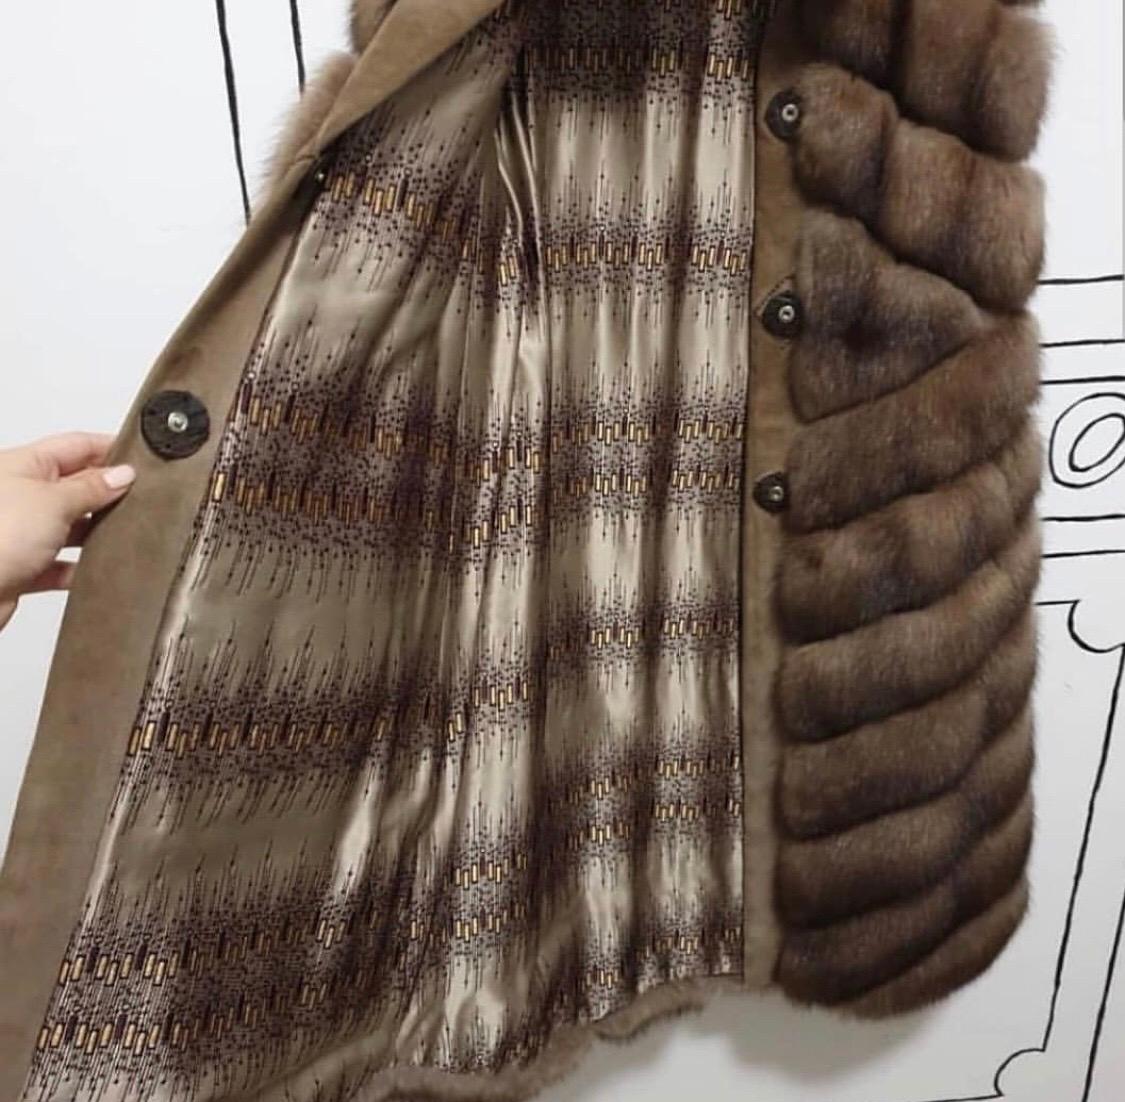 Zilli Sable Fur Sleeveless Coat

Unique and rare collector’ item. 

Gorgeouse sable fur.

Size S

Retail price: 50 000 euros

For buyers from EU we can provide shipping from Poland. Please demand if you need.

